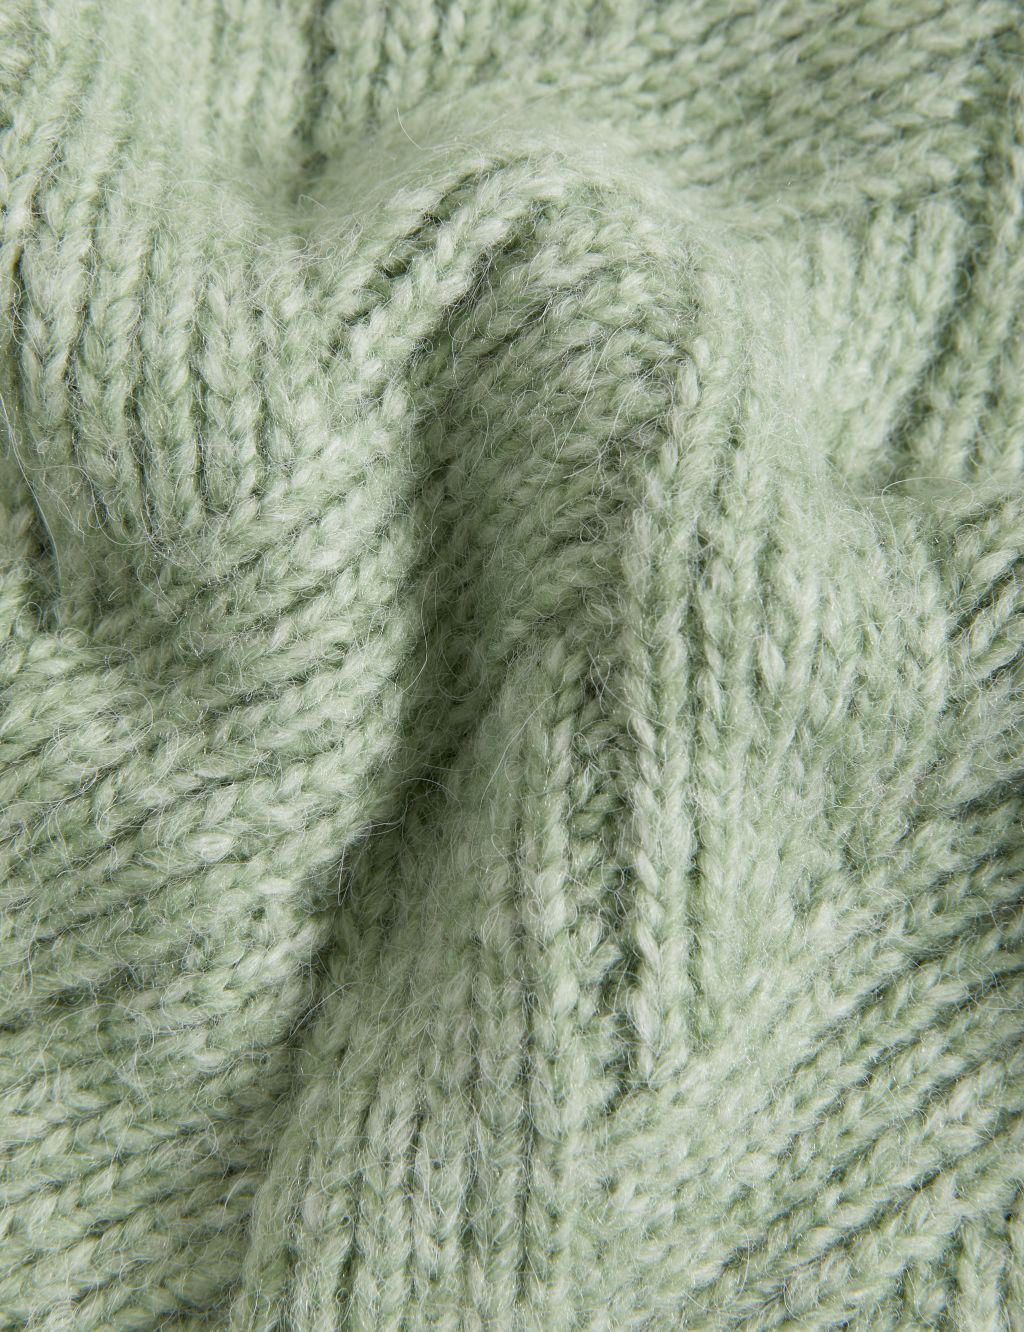 Textured Knitted Vest with Wool image 6